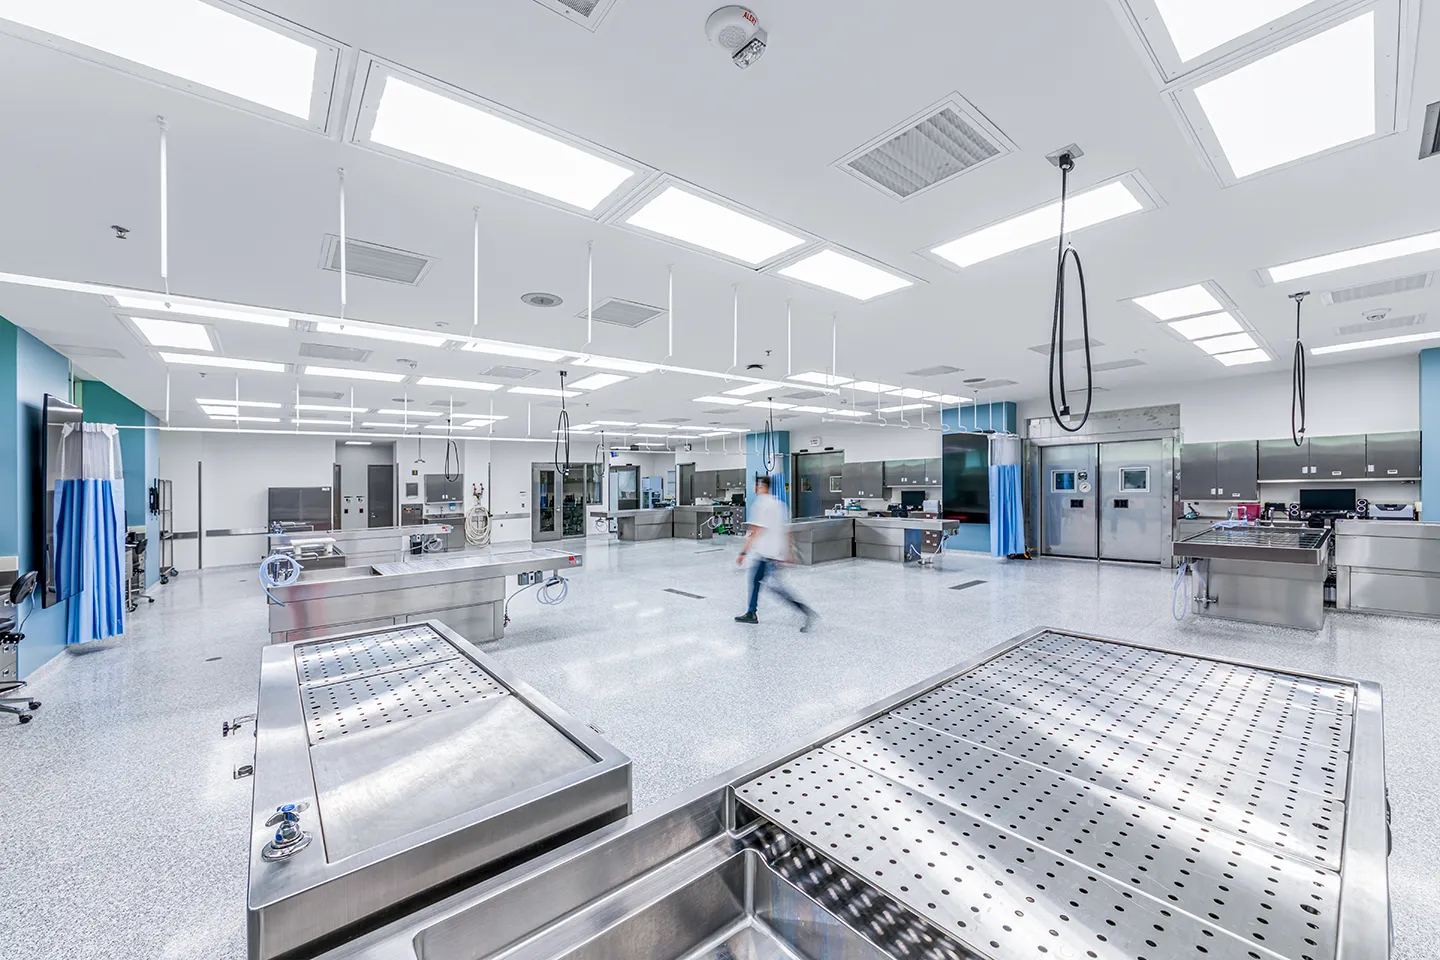 The medical examiner facility features leading-edge equipment and technologies that make it one of the most advanced in the country. Lighting, functional flow, and air quality were considered during design.